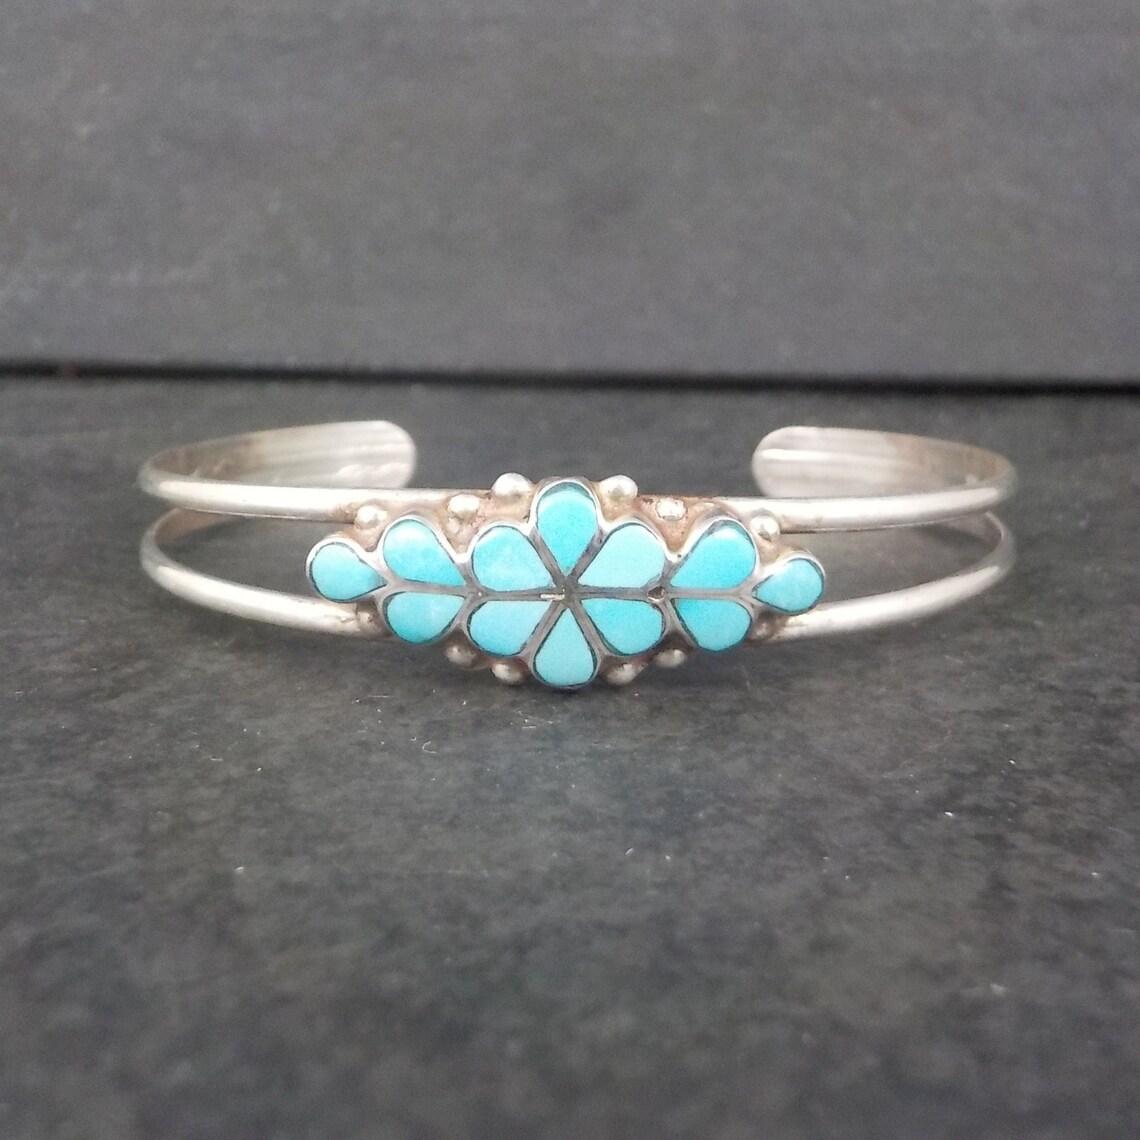 This beautiful vintage Southwestern cuff bracelet is sterling silver with natural turquoise inlay.

The face of this bracelet measures 7/16 of an inch wide.
It has an inner circumference of 6 inches including the 1 inch gap.
Weight: 7.6